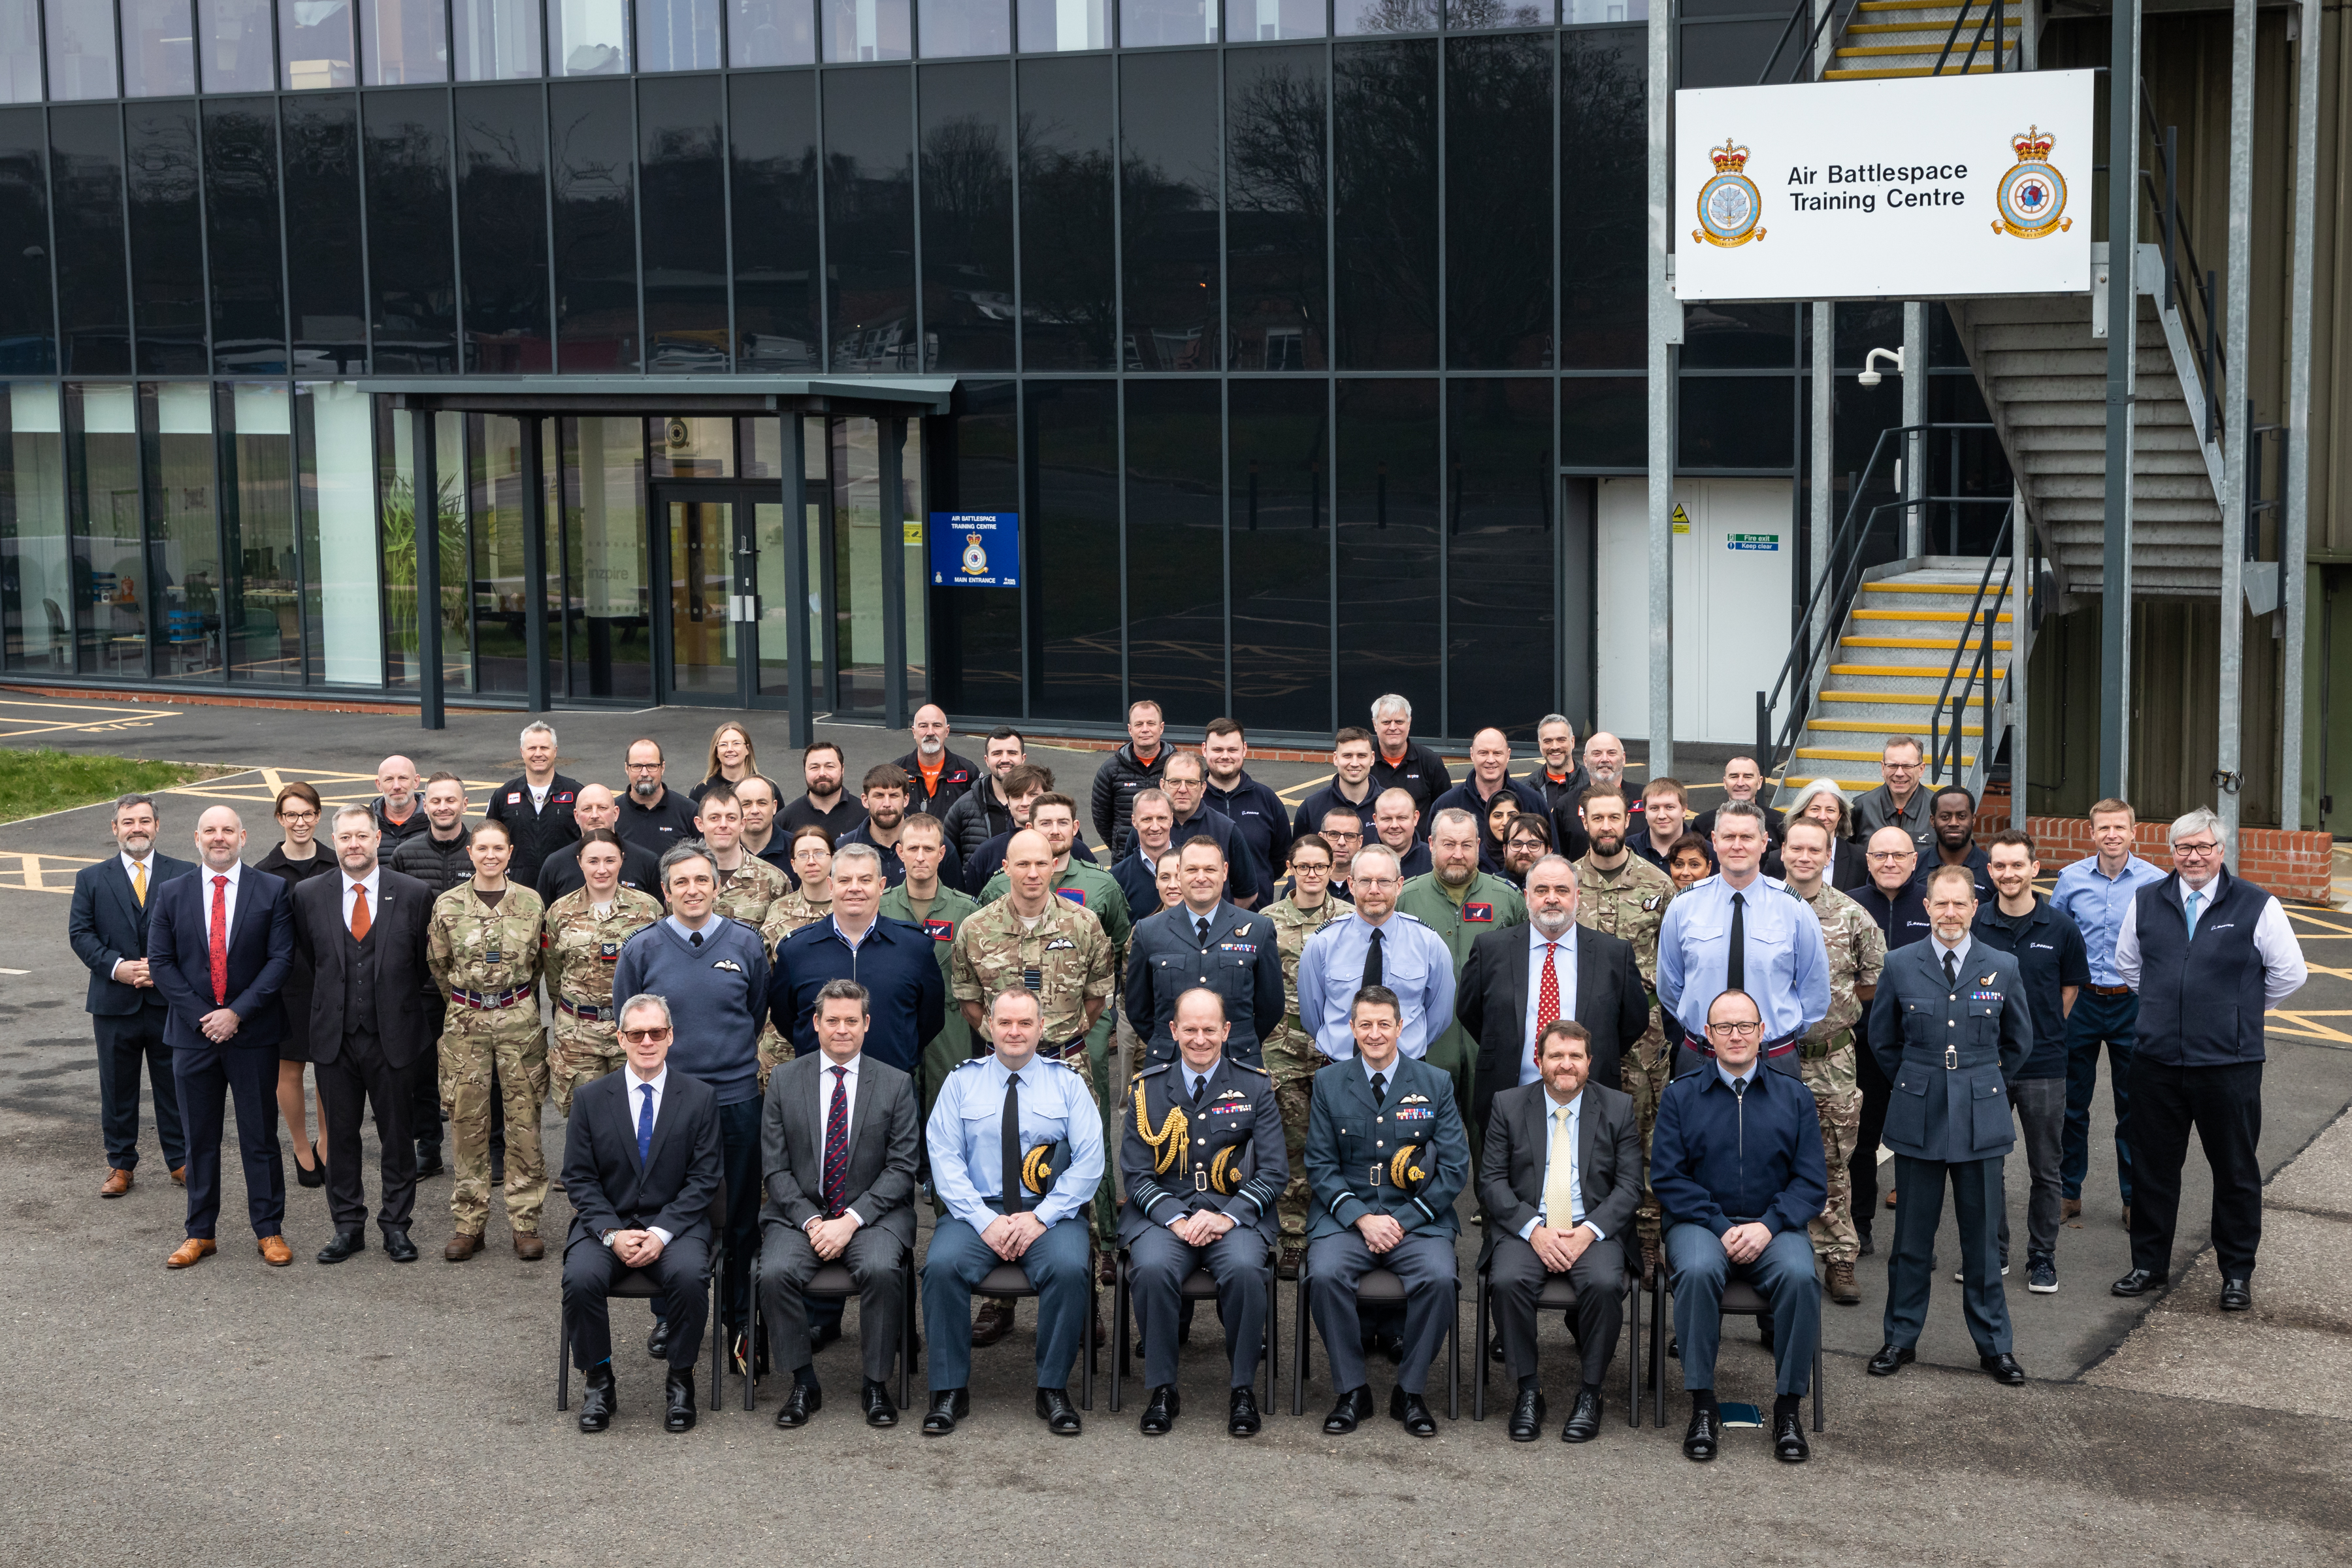 Image show RAF aviators and civilians in group photo outside Air Battlespace Training Centre.